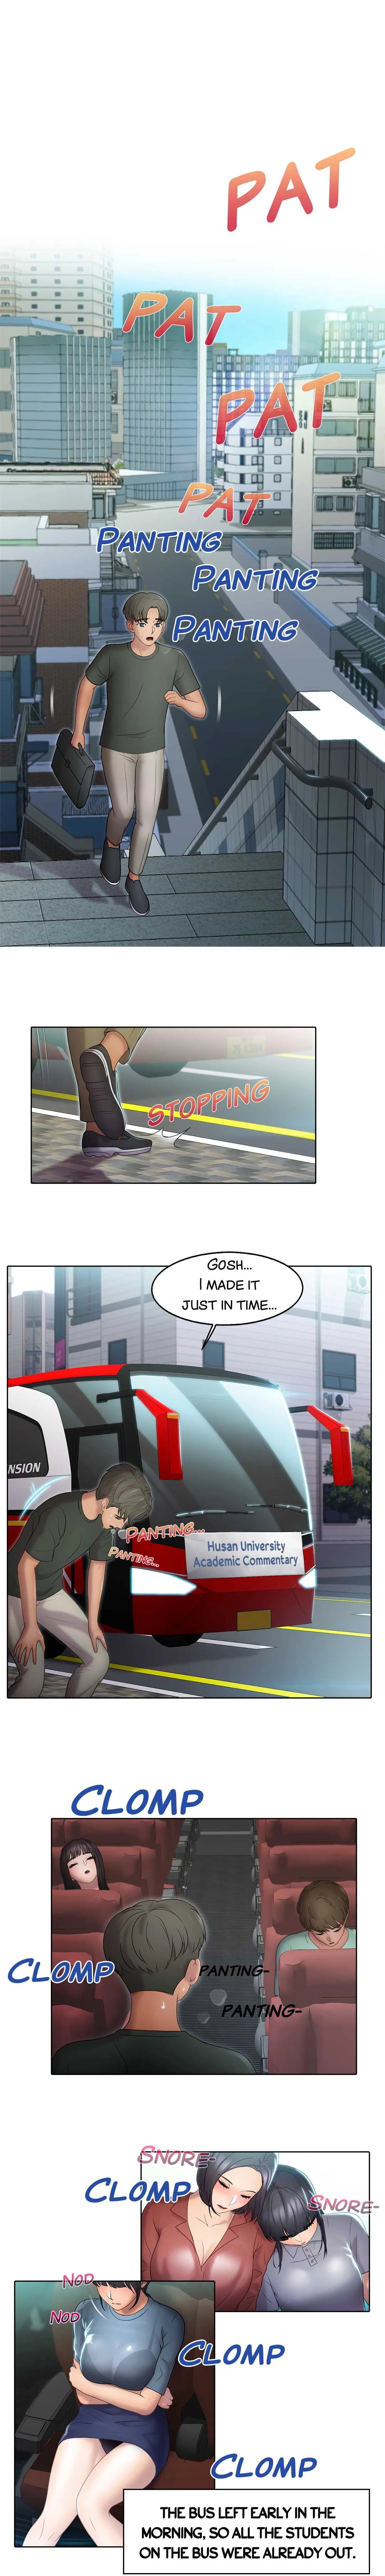 Inside the bus - Chapter 1 Page 2